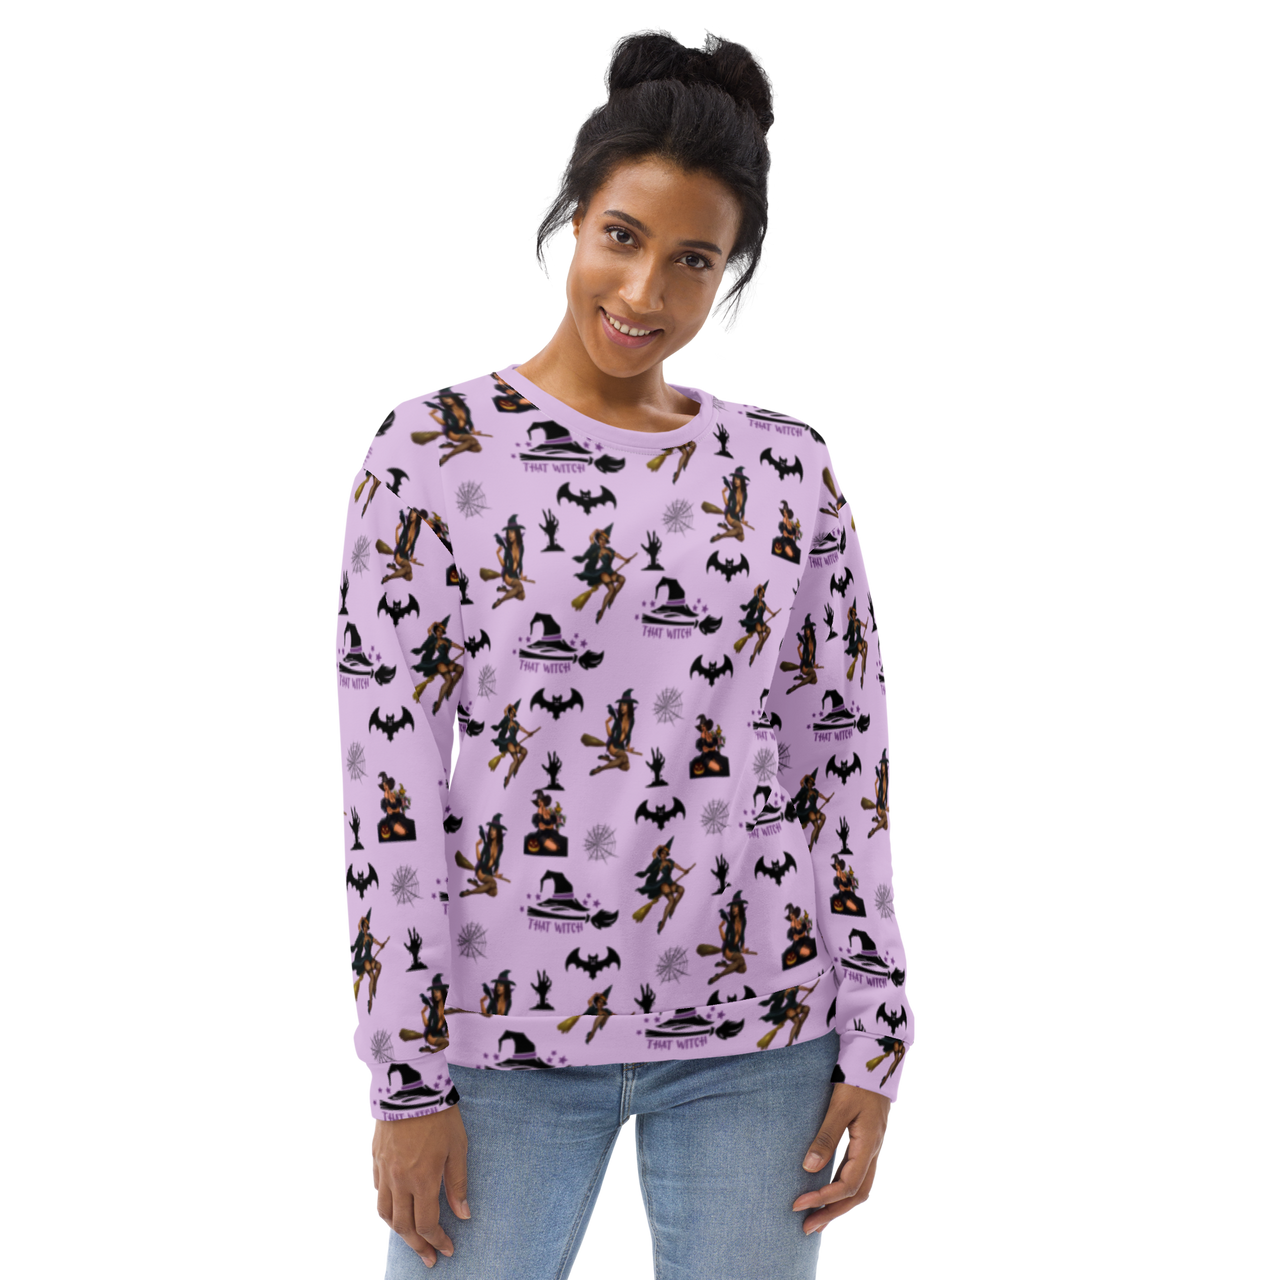 All over Unisex Halloween Sweater - Funny Halloween Sweatshirts - Unisex Halloween Sweatshirt For Halloween/That Witch SHAVA